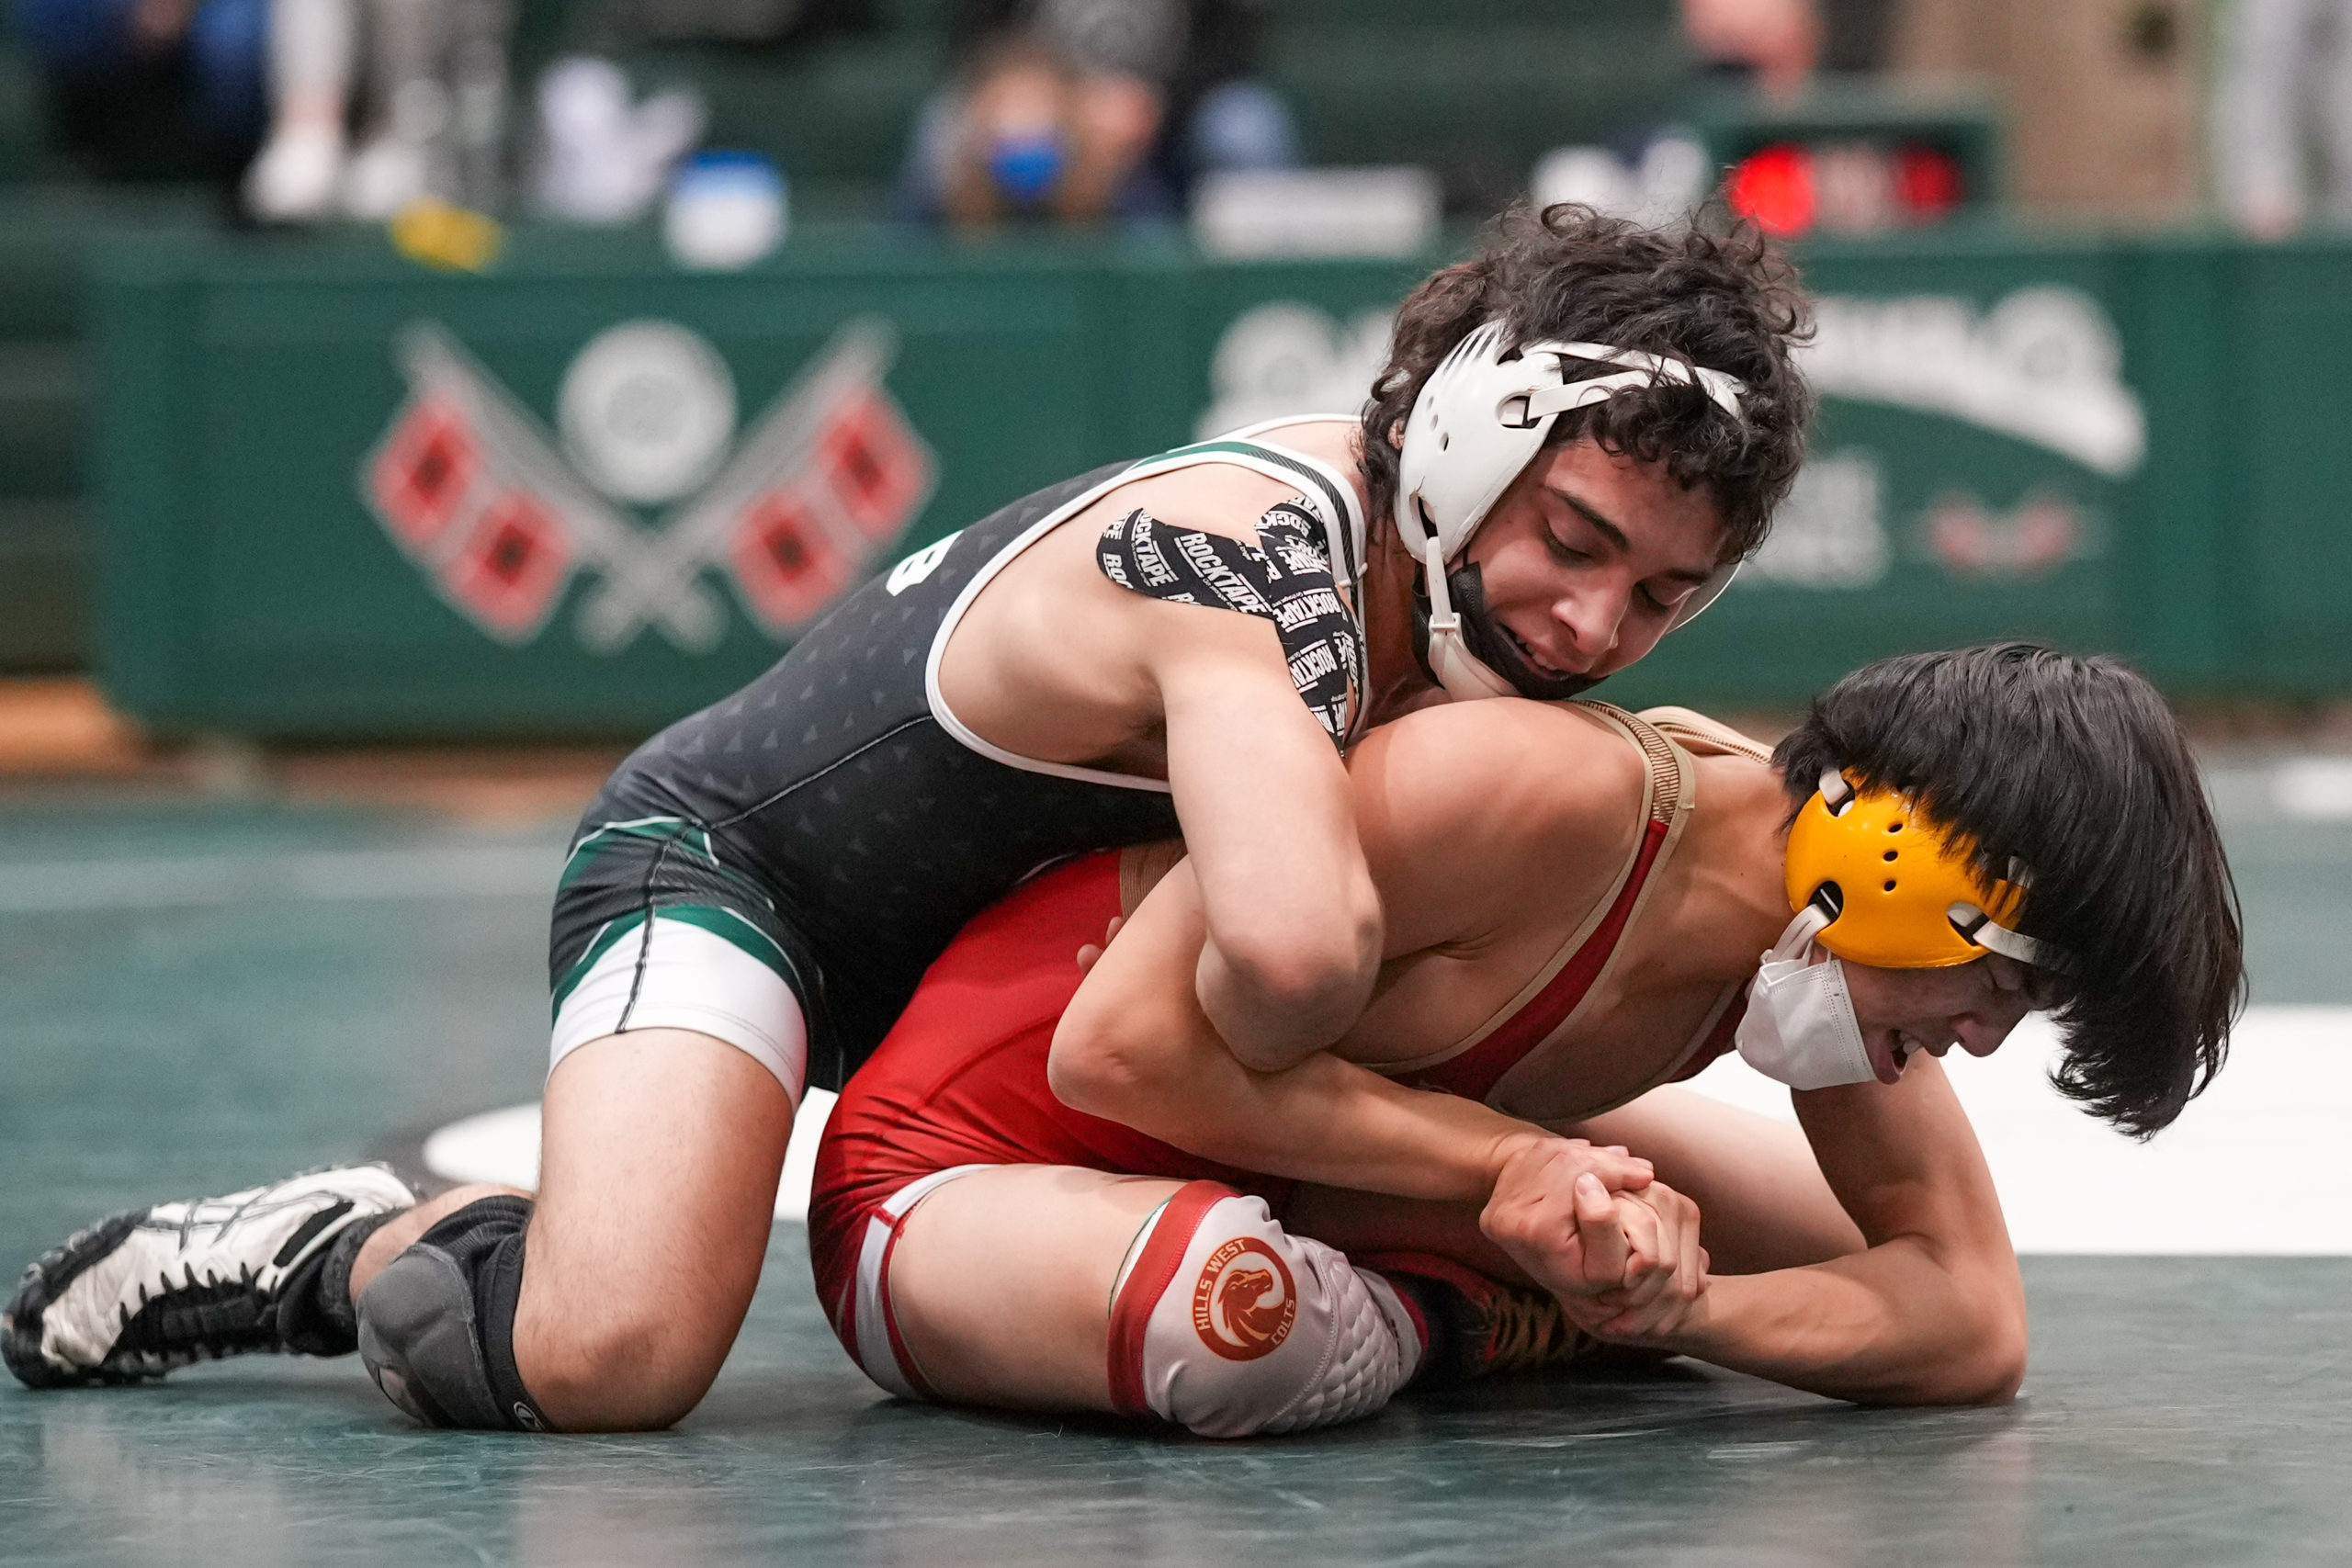 Randy Cabrera of Westhampton Beach works on Donghyun Lee of Hills West, whom he beat, 6-2.